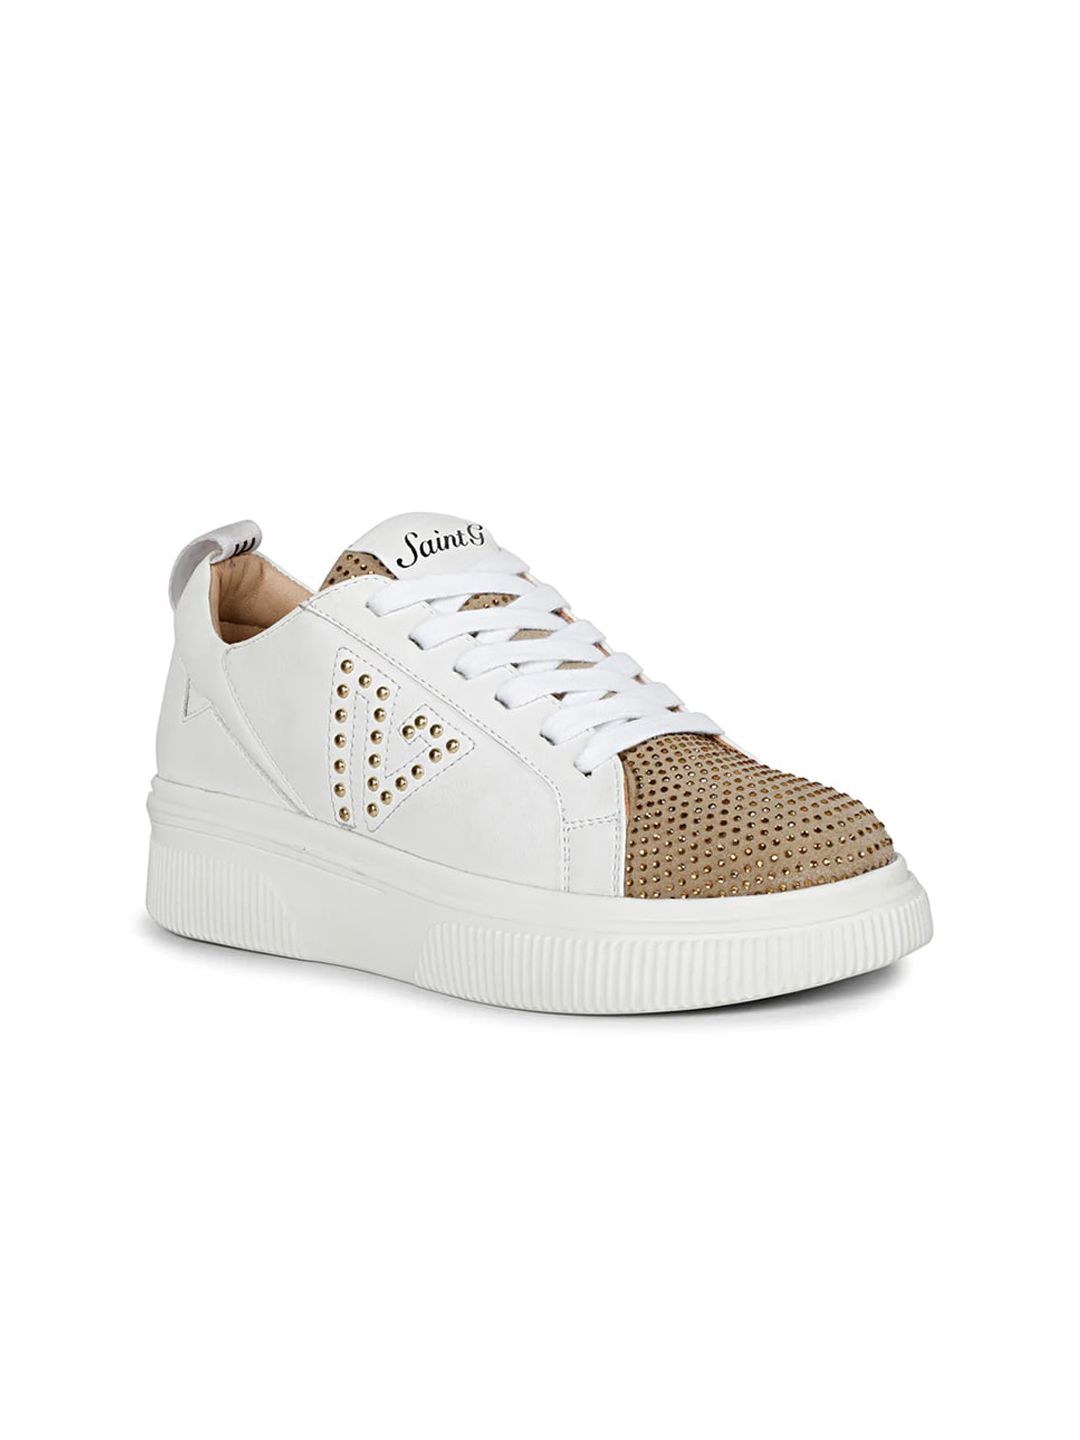 Saint G Women Embellished Leather Sneakers Price in India